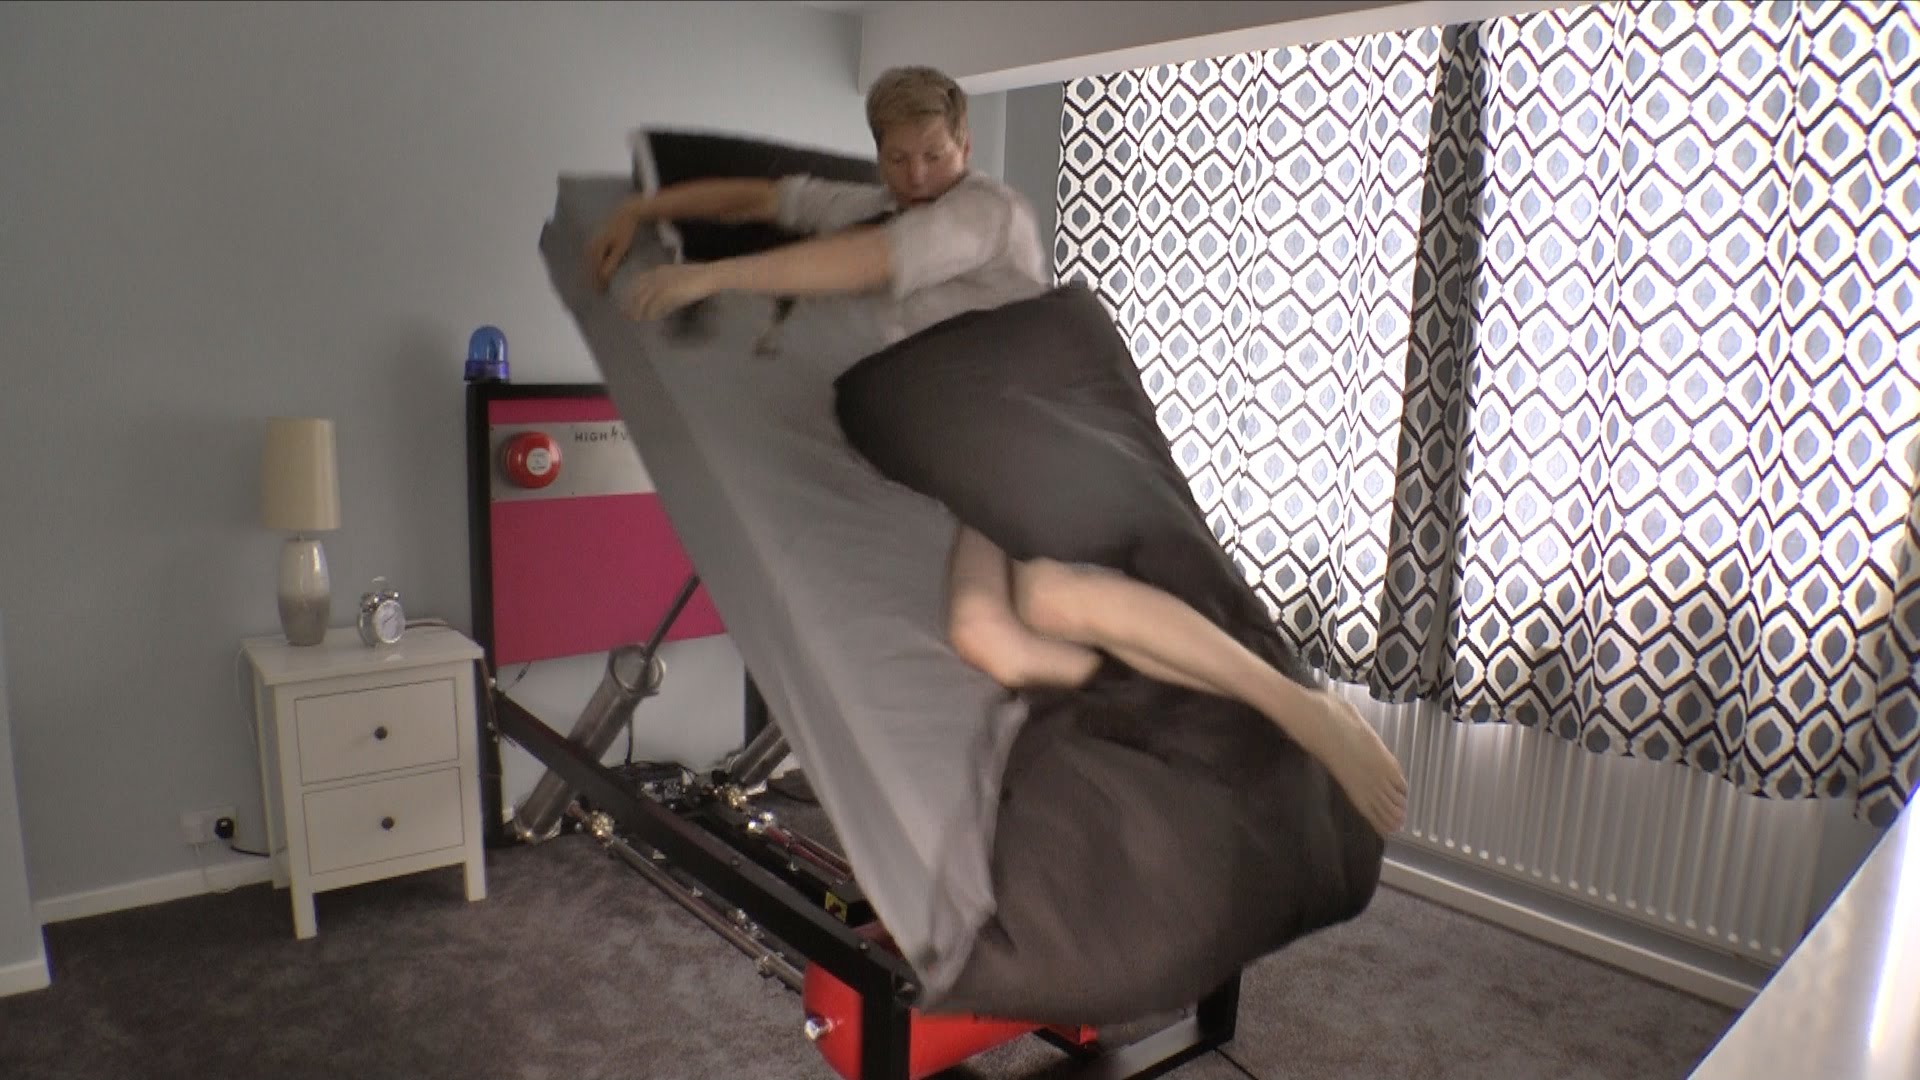 This ejector bed that launches you to wake up